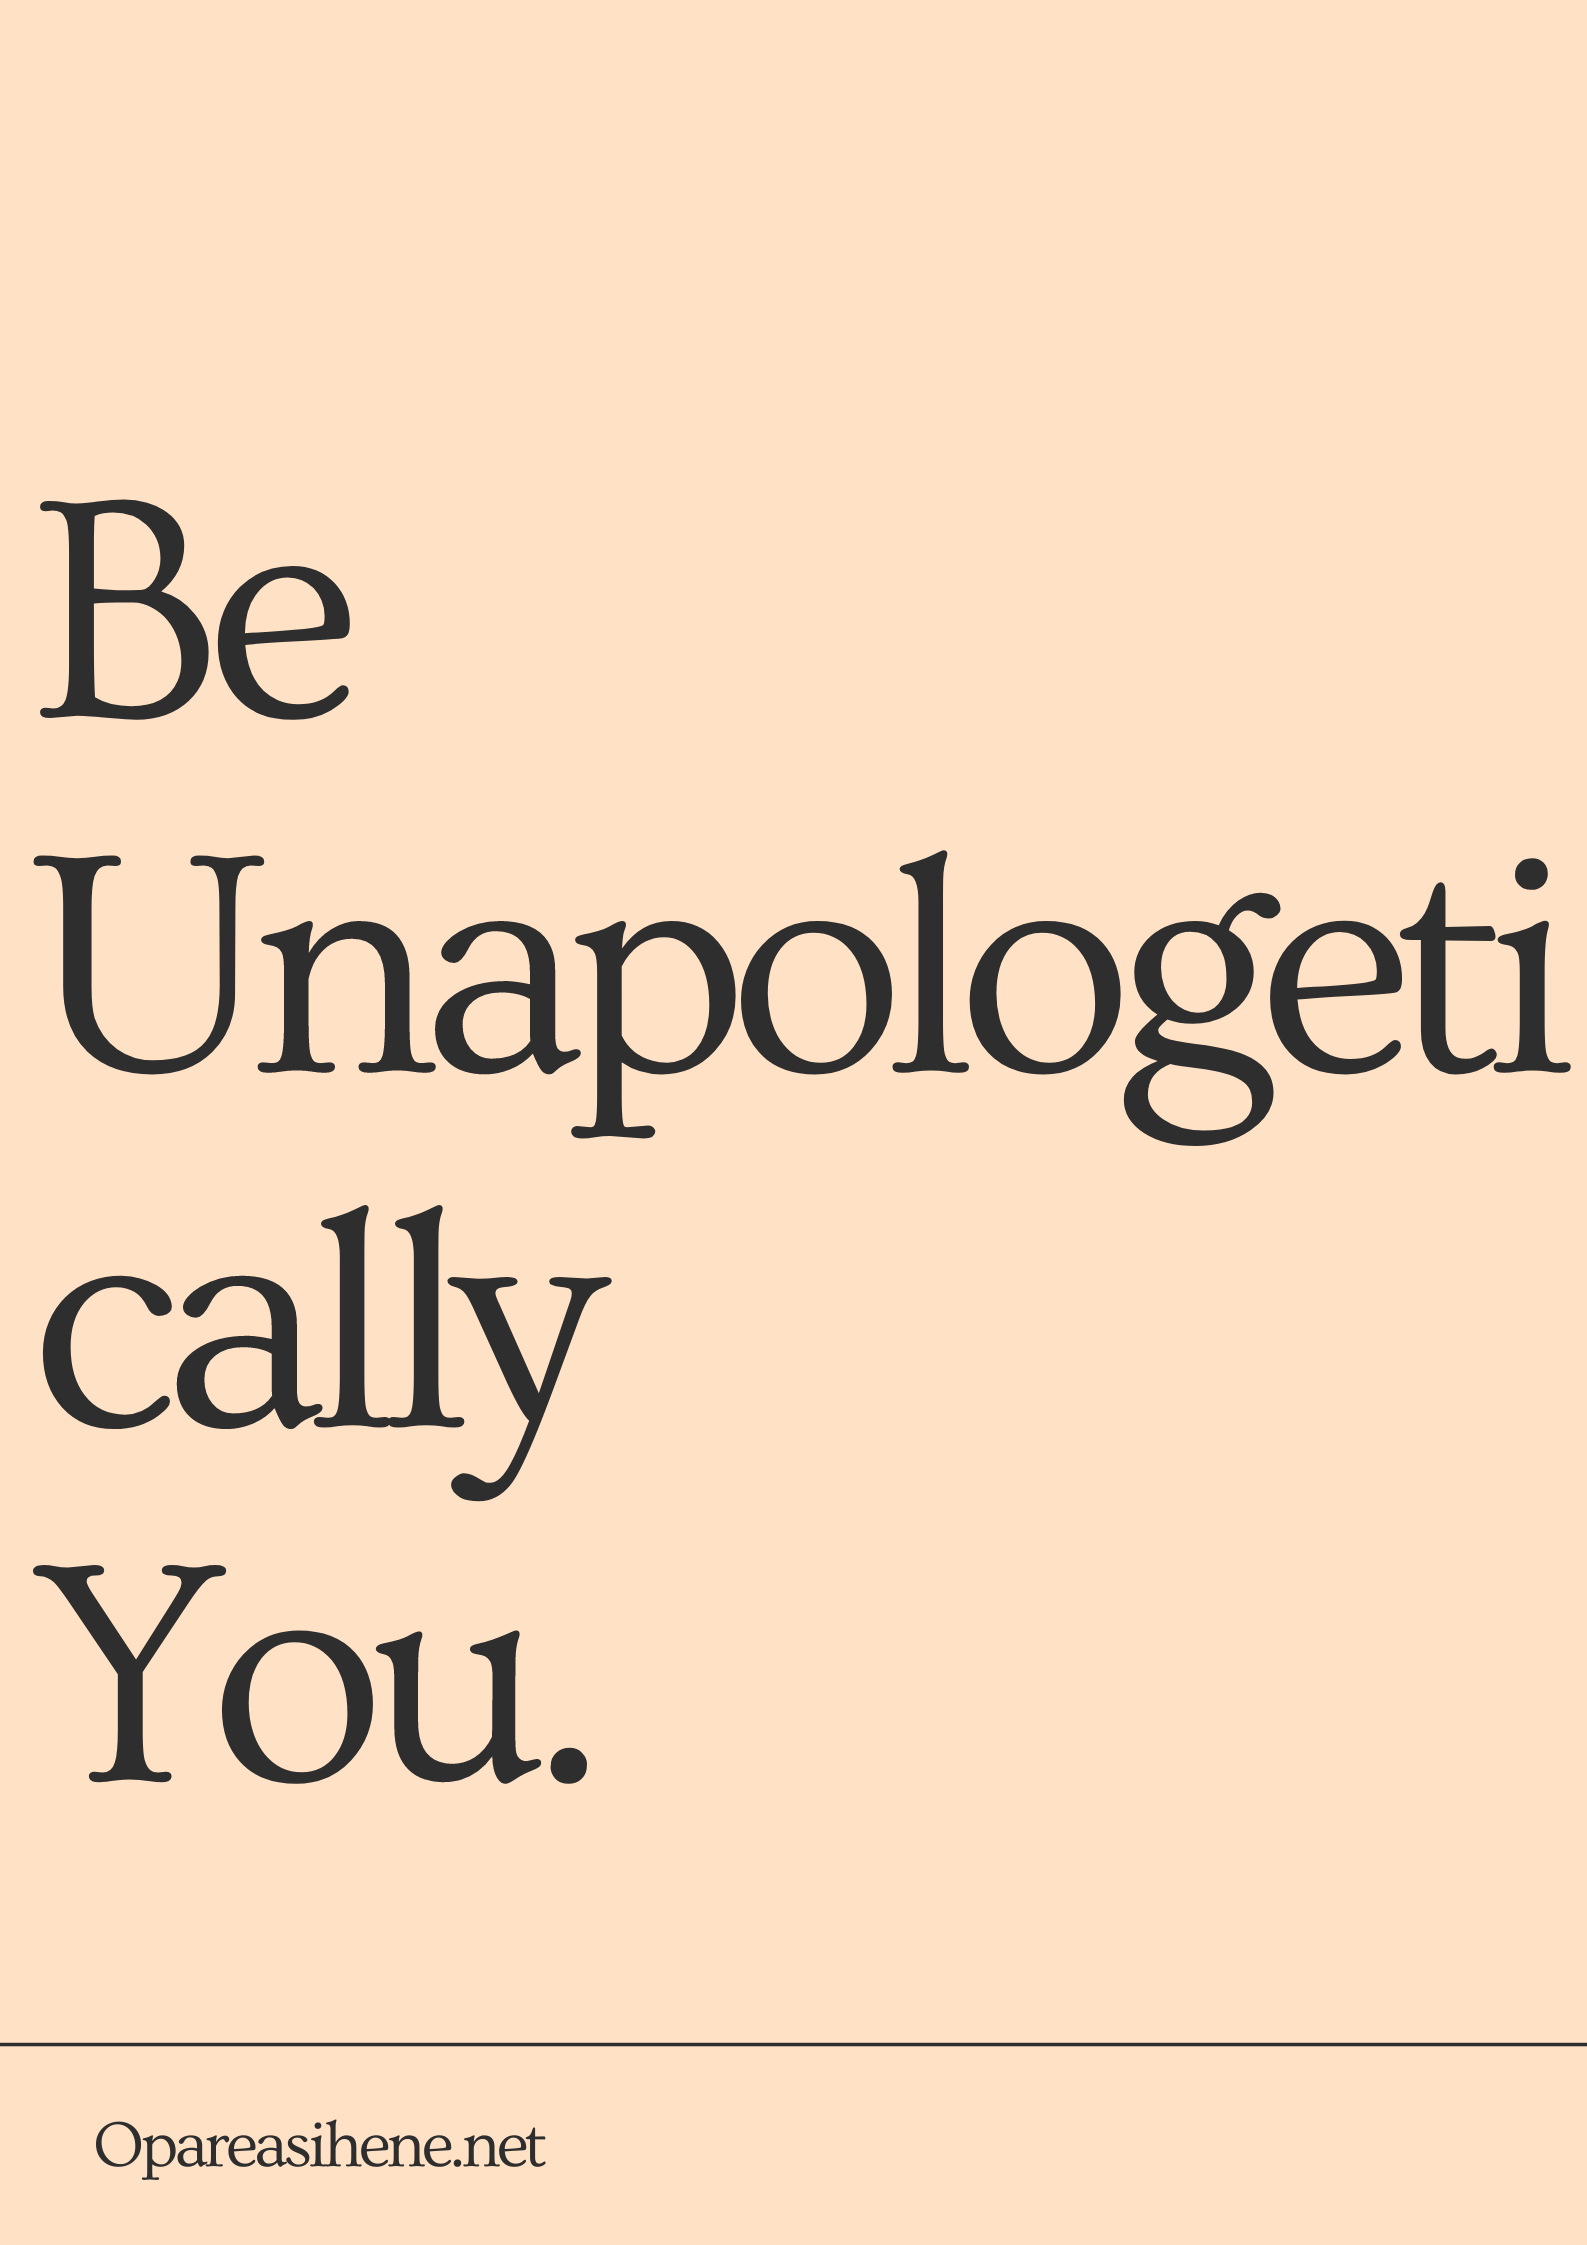 Be Unapologetically You. Be yourself and if people can't accept that, they aren't for you.